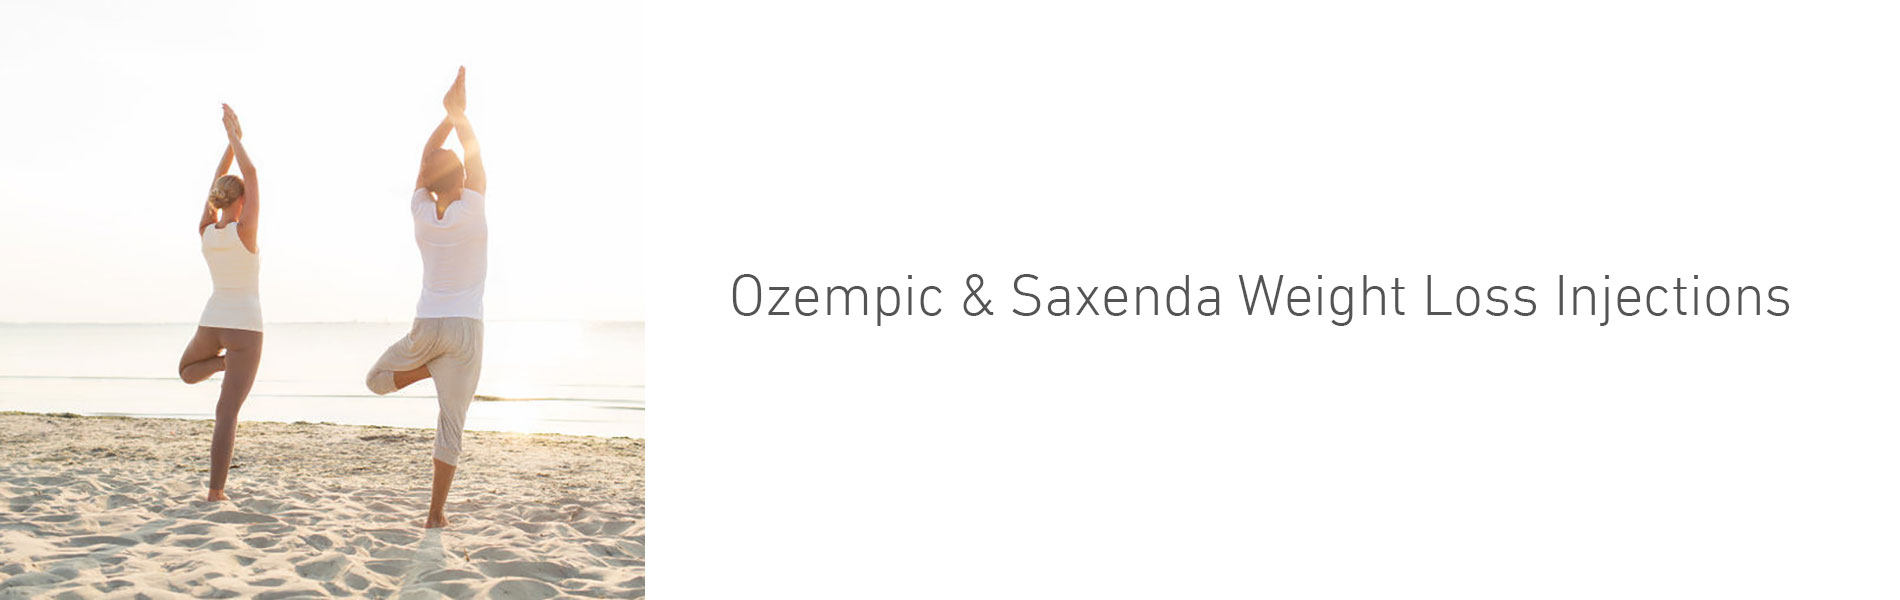 Ozempic Saxenda Weight Loss Injections banner